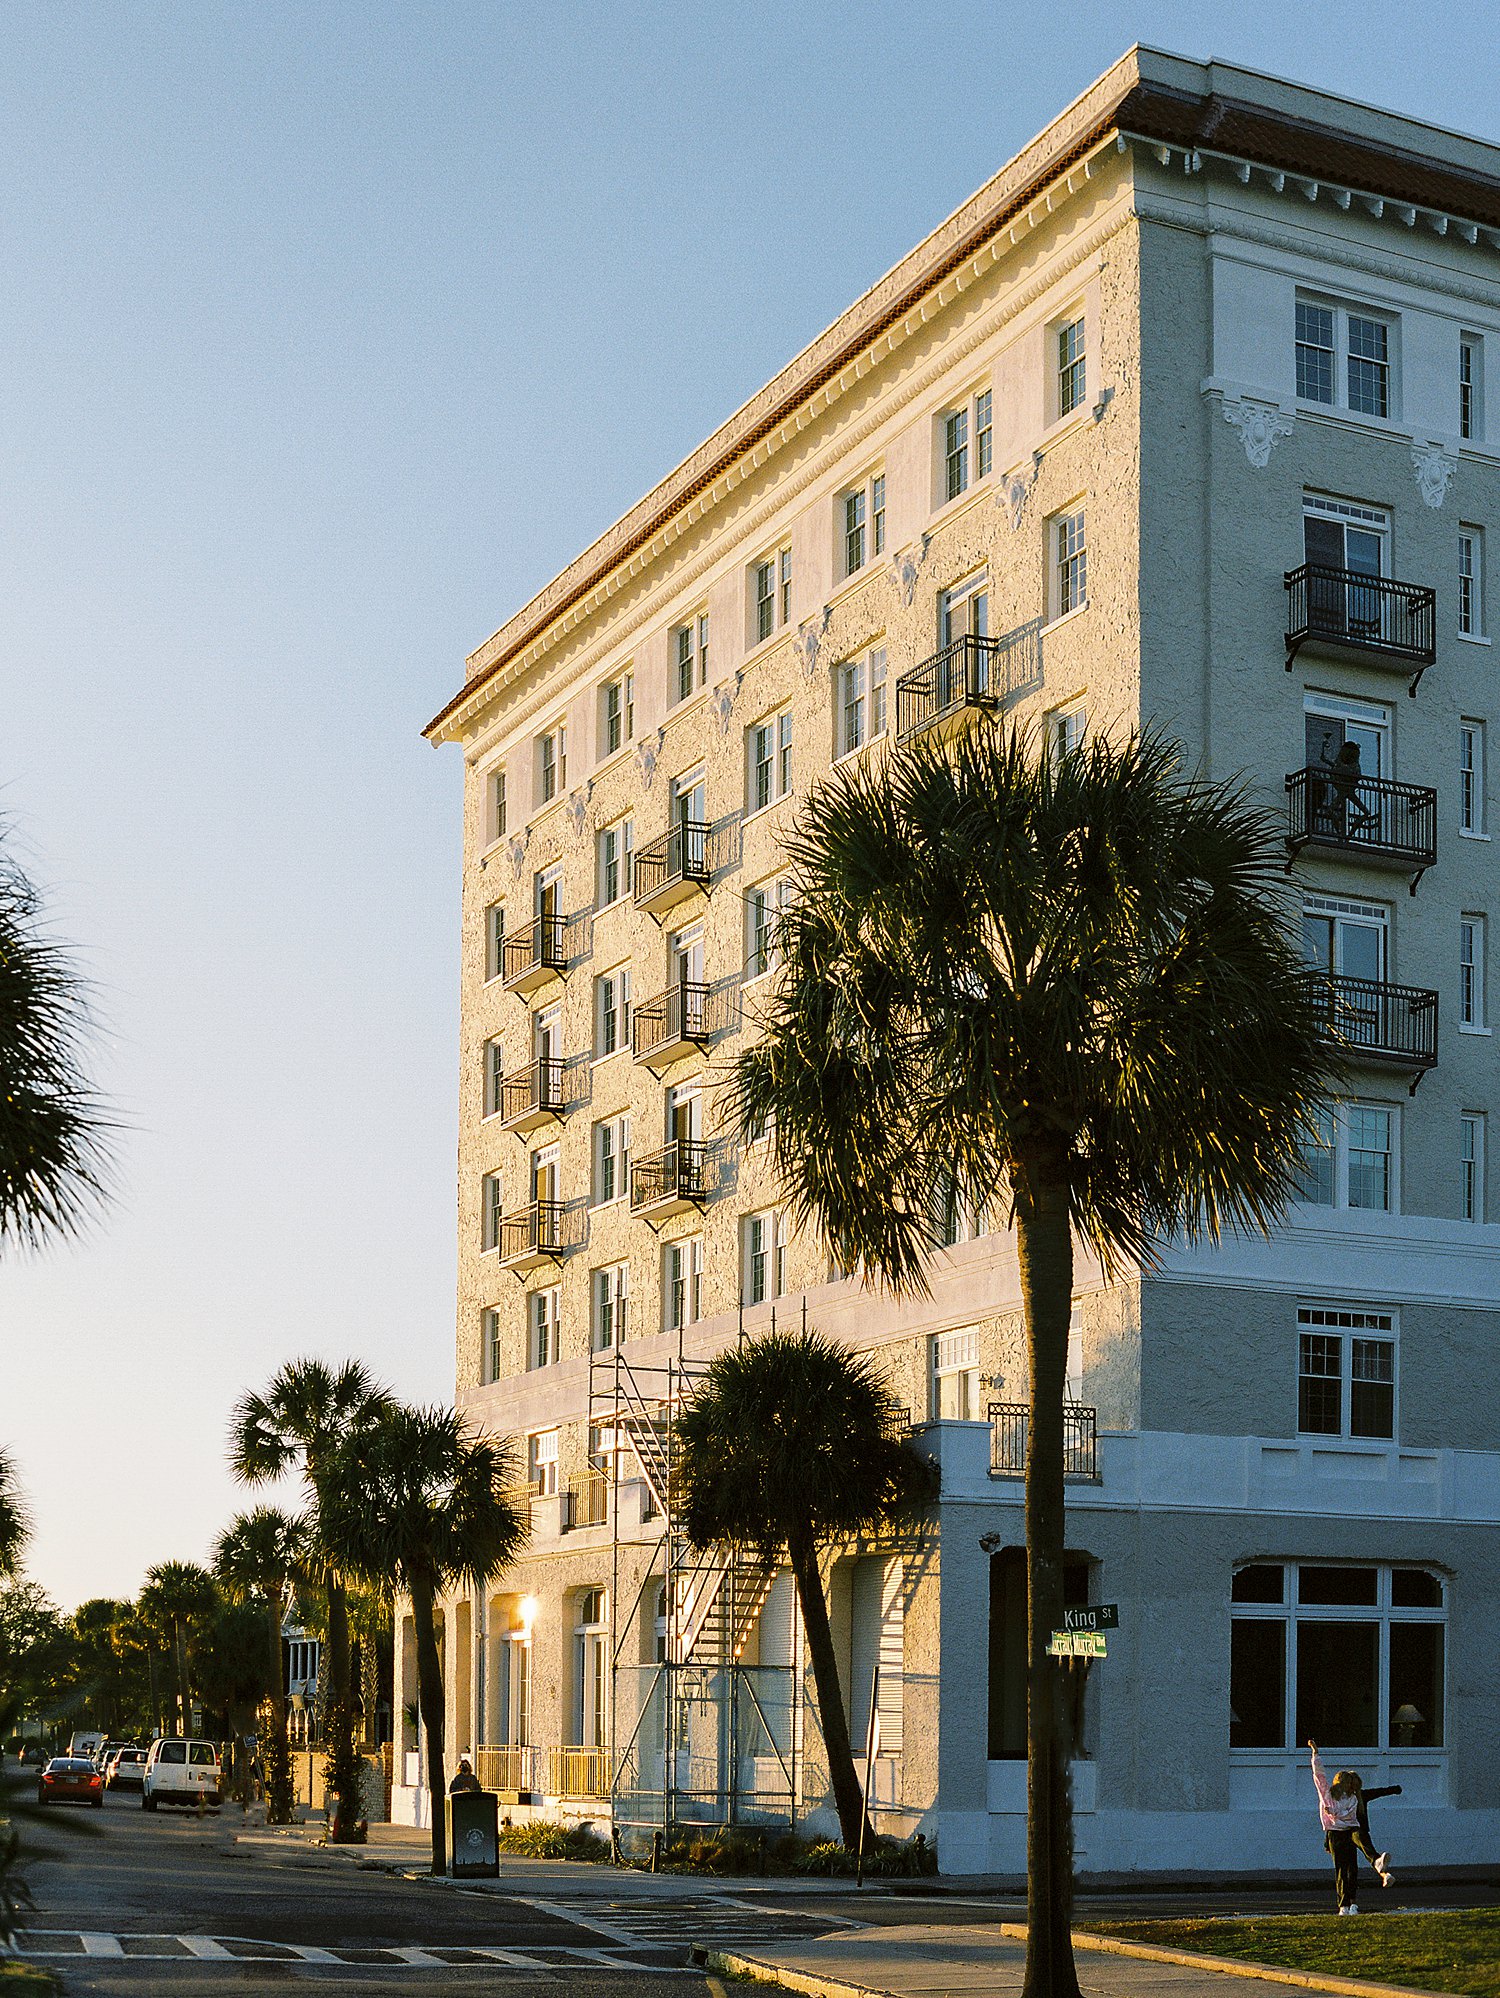 Sunset light on seven story historic building set among palm trees in Charleston